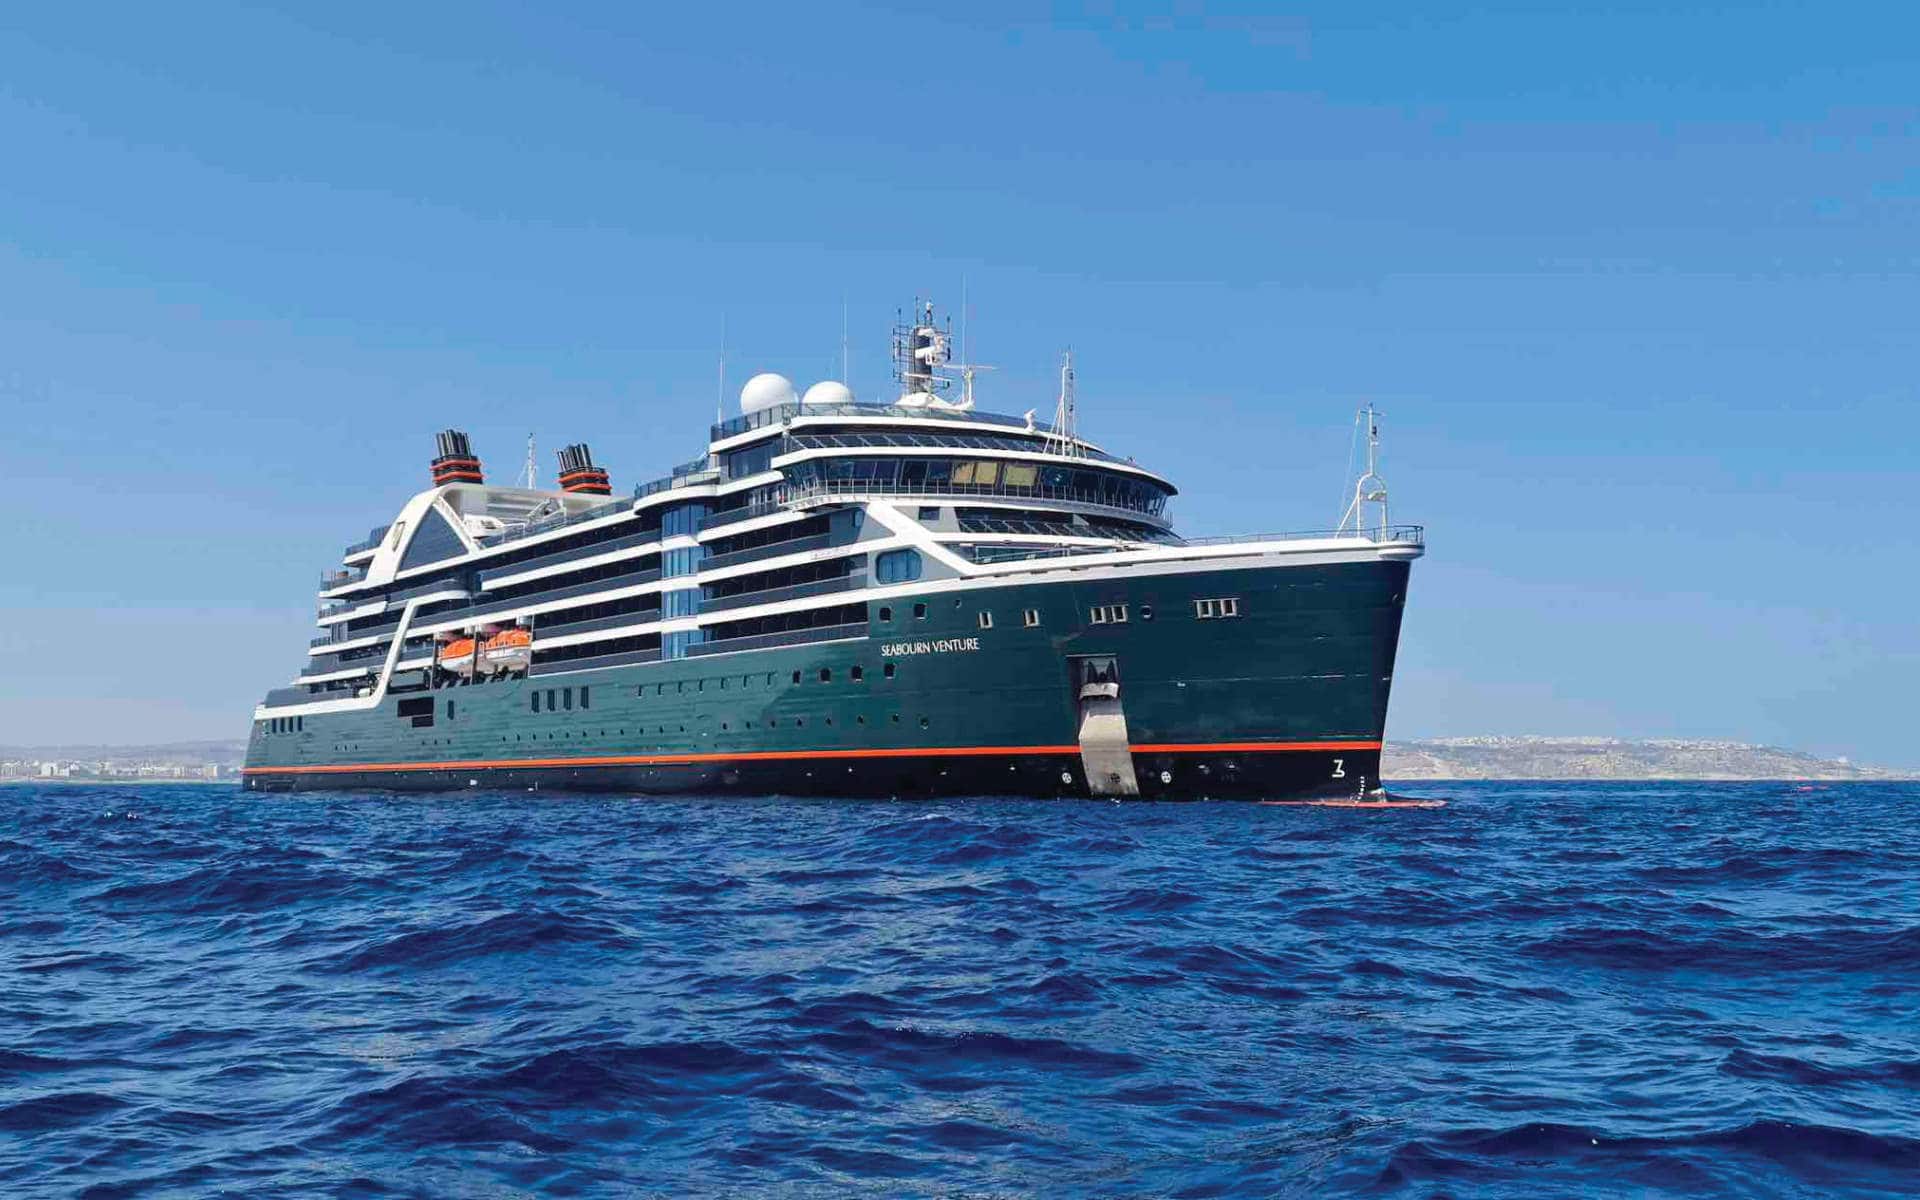 The Seabourn Venture cruise ship which made it inaugural voyage in July 2022.